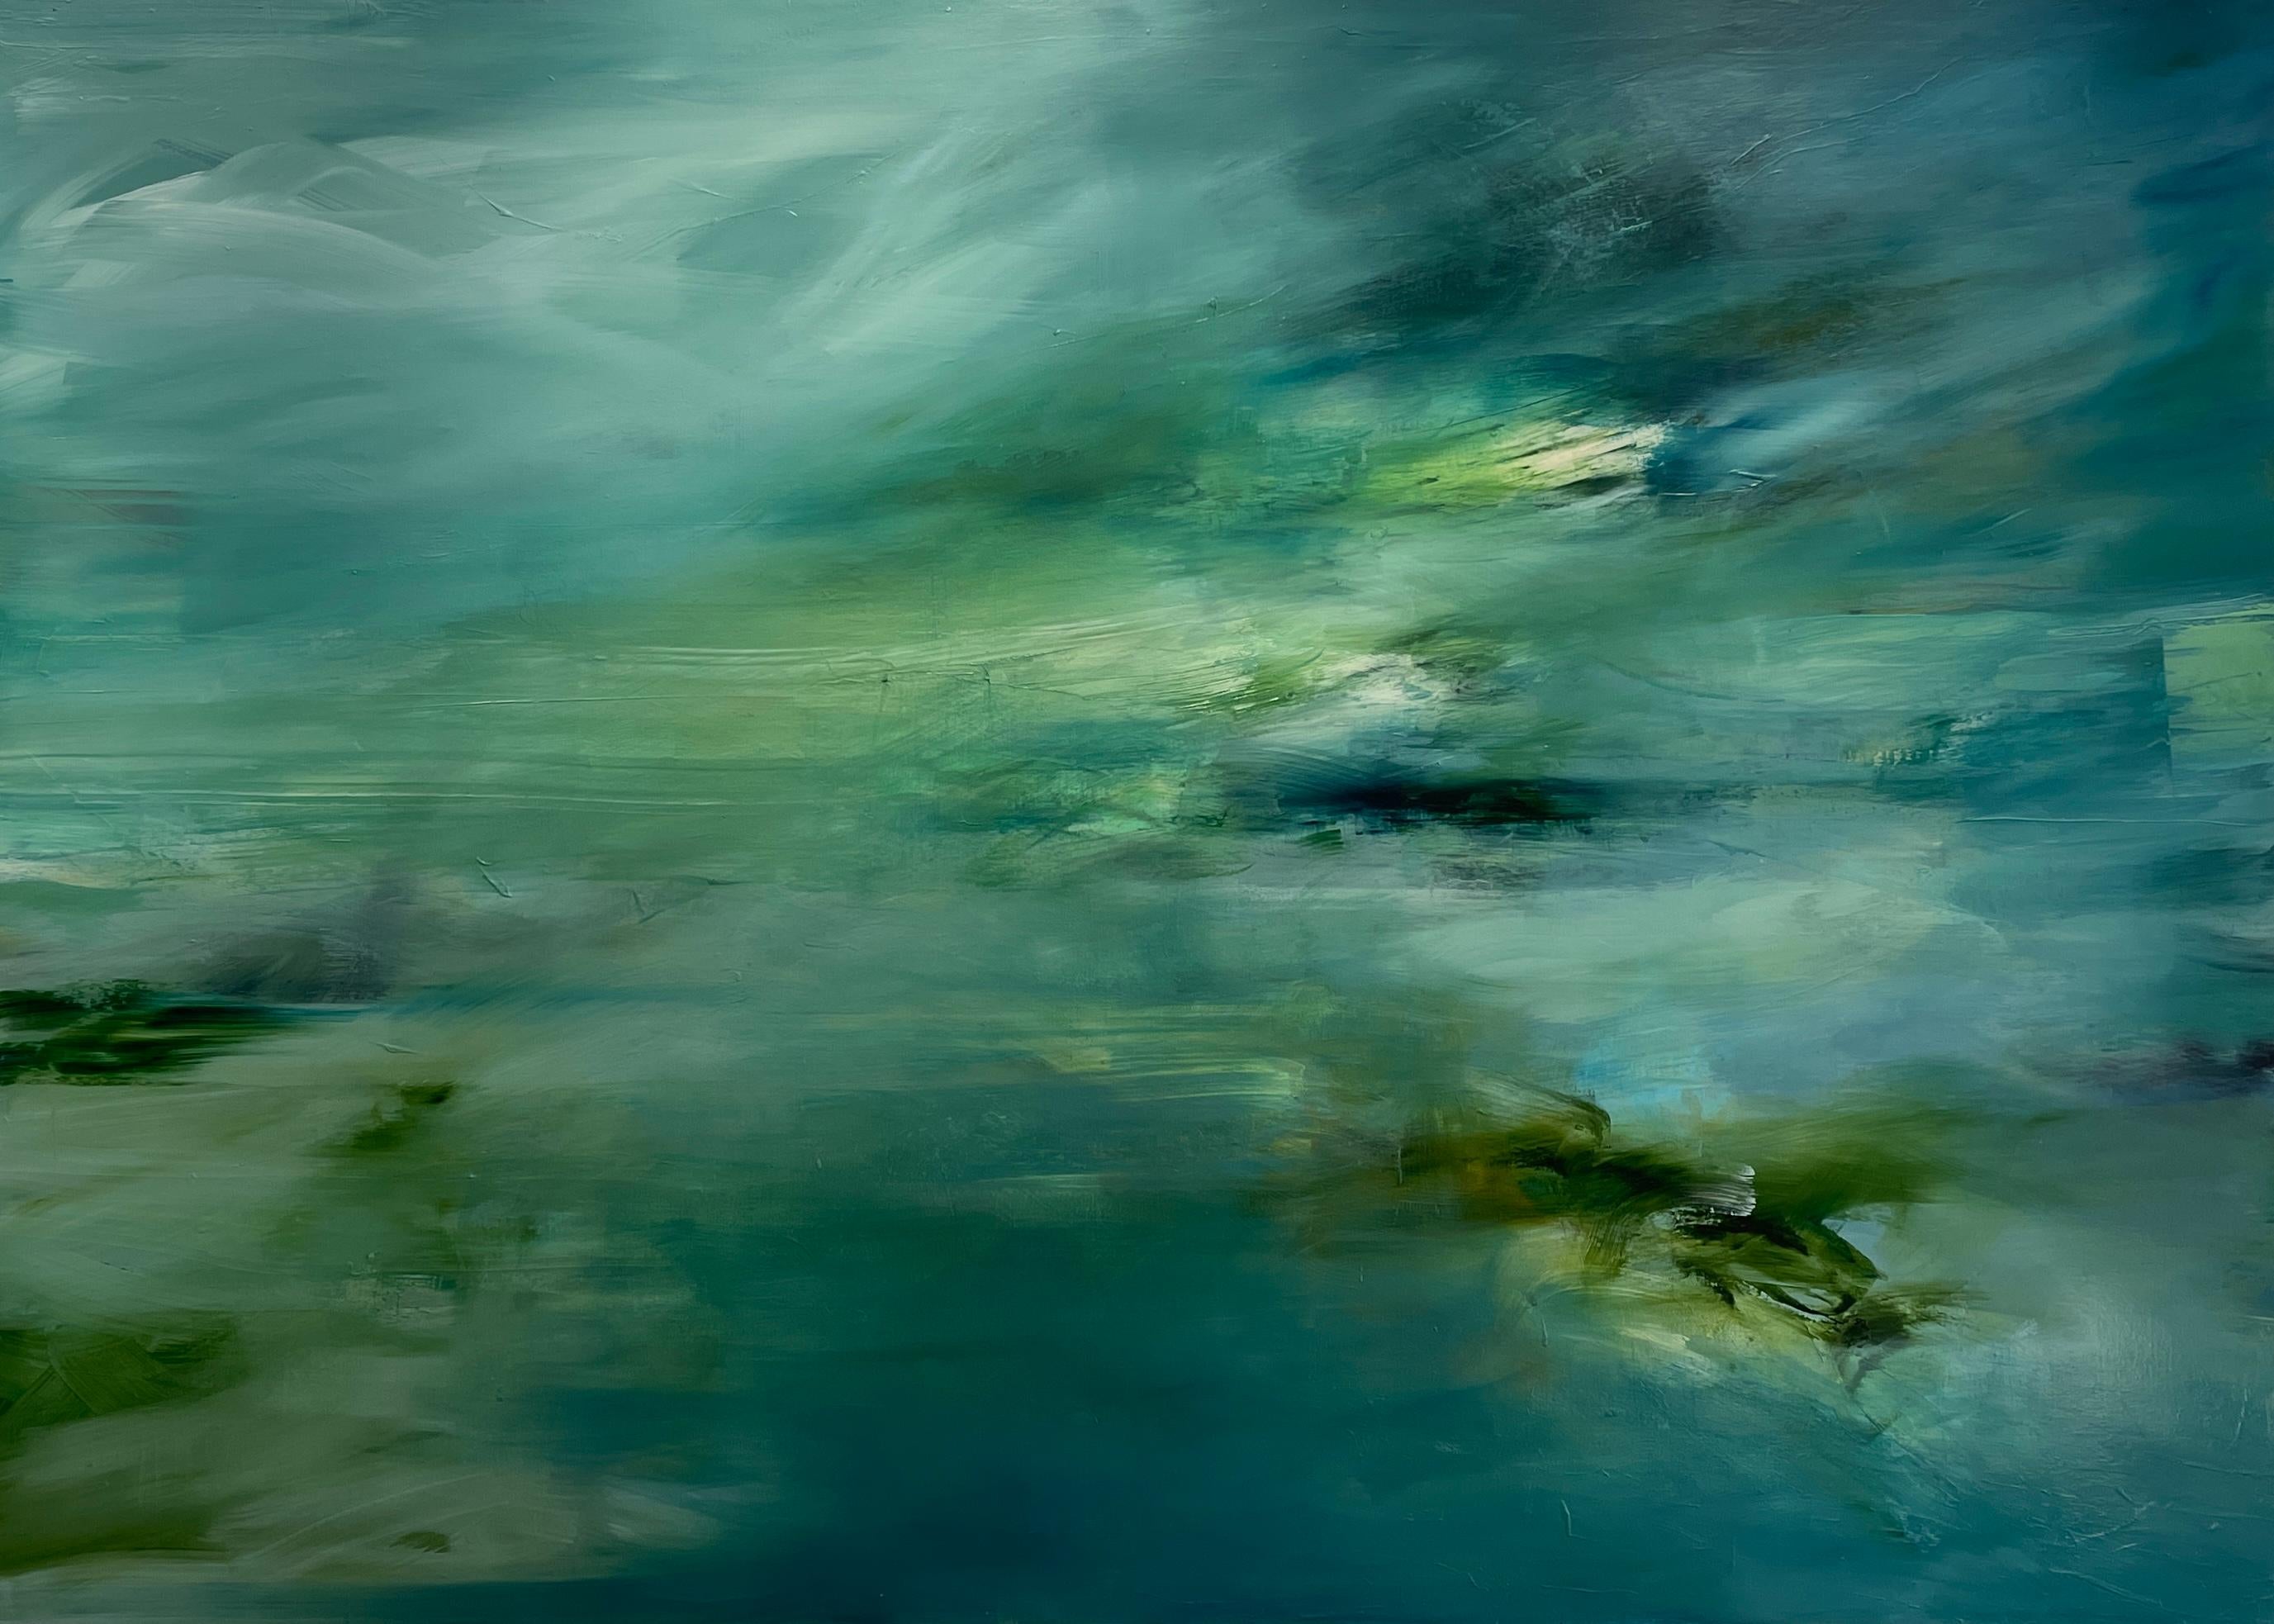 Katheryn Holt Landscape Painting - "Sea Garden 2" Very Large Mixed Media Abstract Expressionist Seascape on Canvas